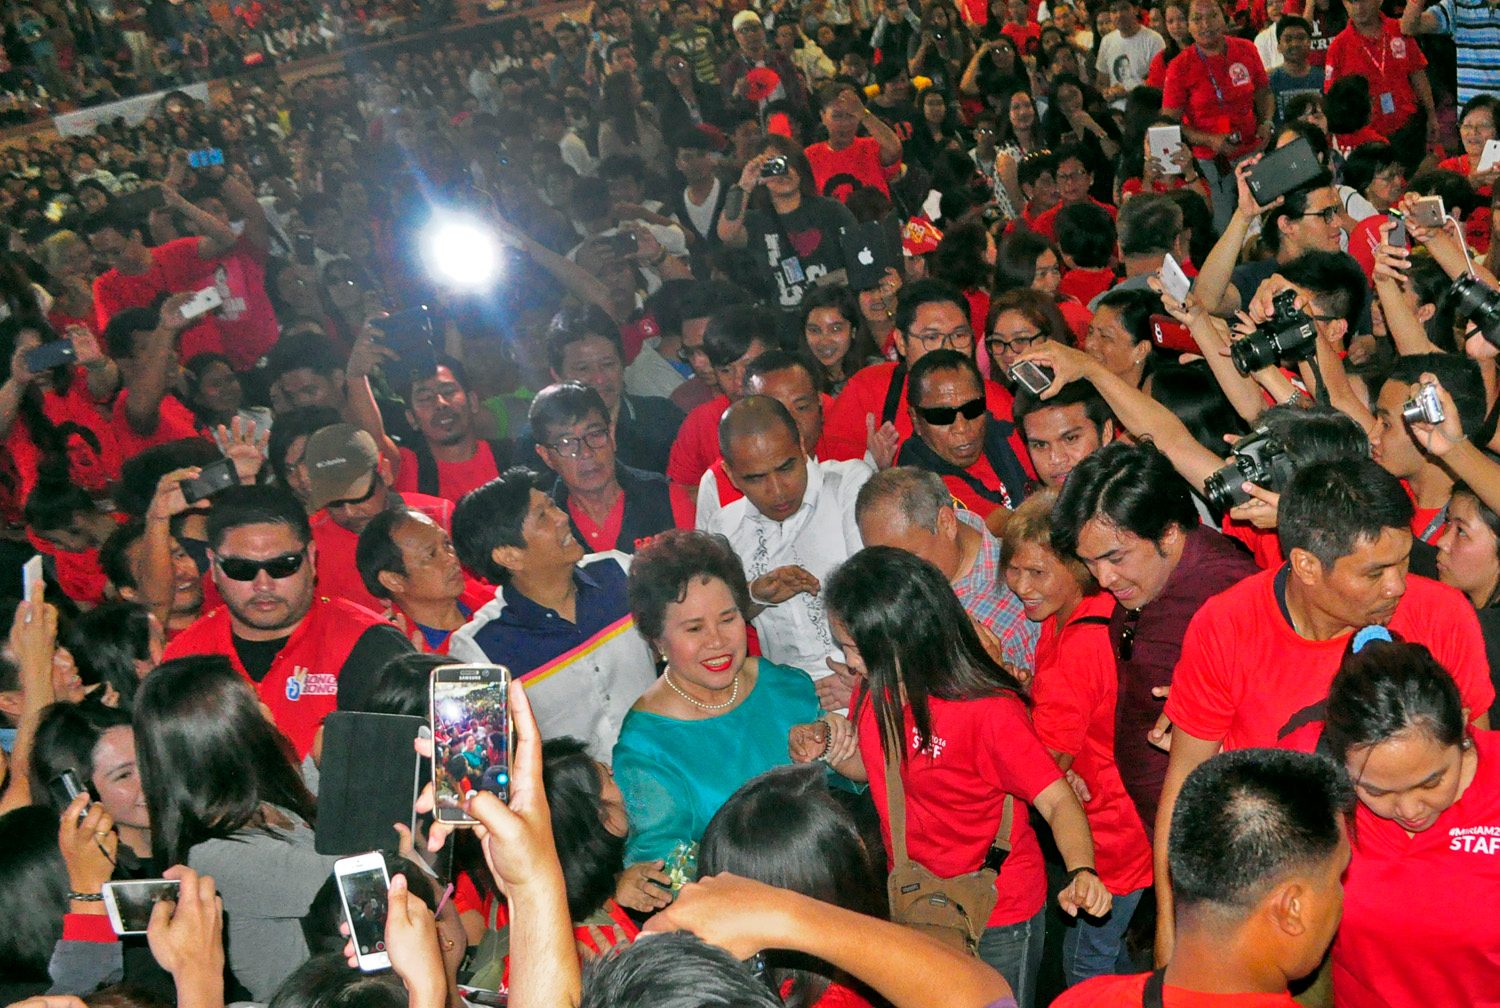 Miriam Santiago: Back on the campaign trail, back with pick-up lines